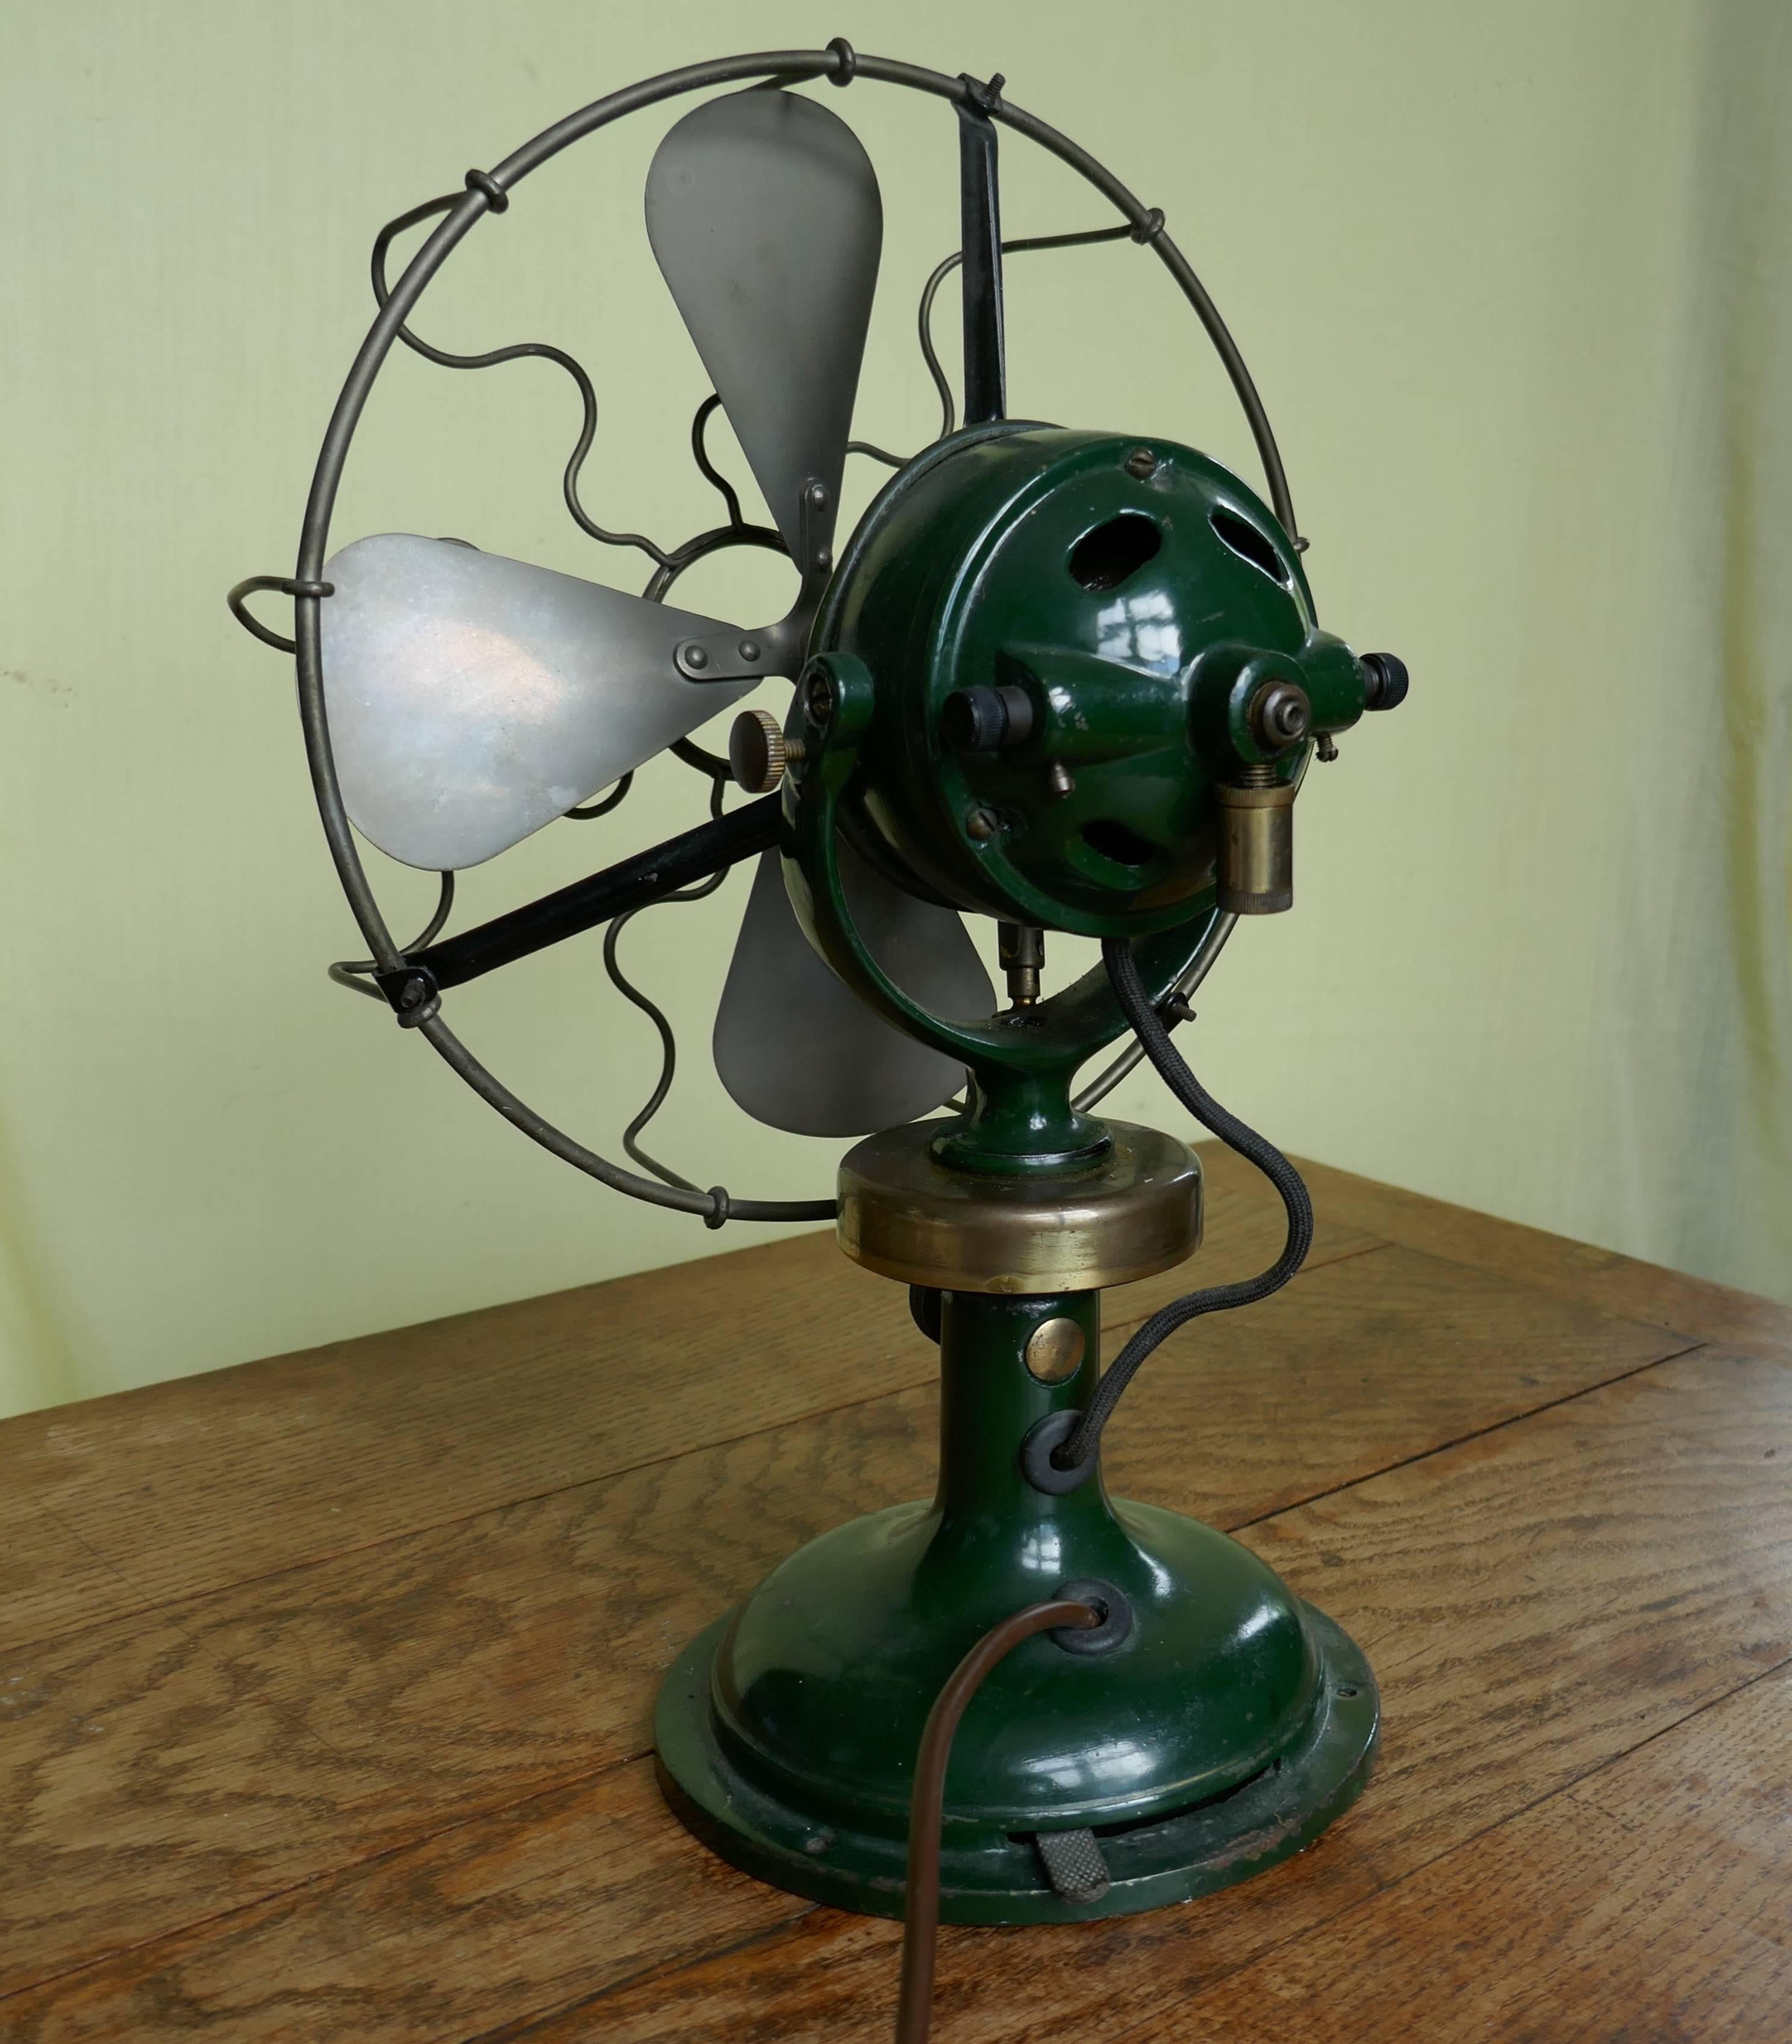 Dark green 1920s Art Deco electric fan, Industrial antique 

A very stylish good looking piece, in shiny dark green with brass fittings

This piece looks to be in very good condition, the motor responds when connected to the electric supply but